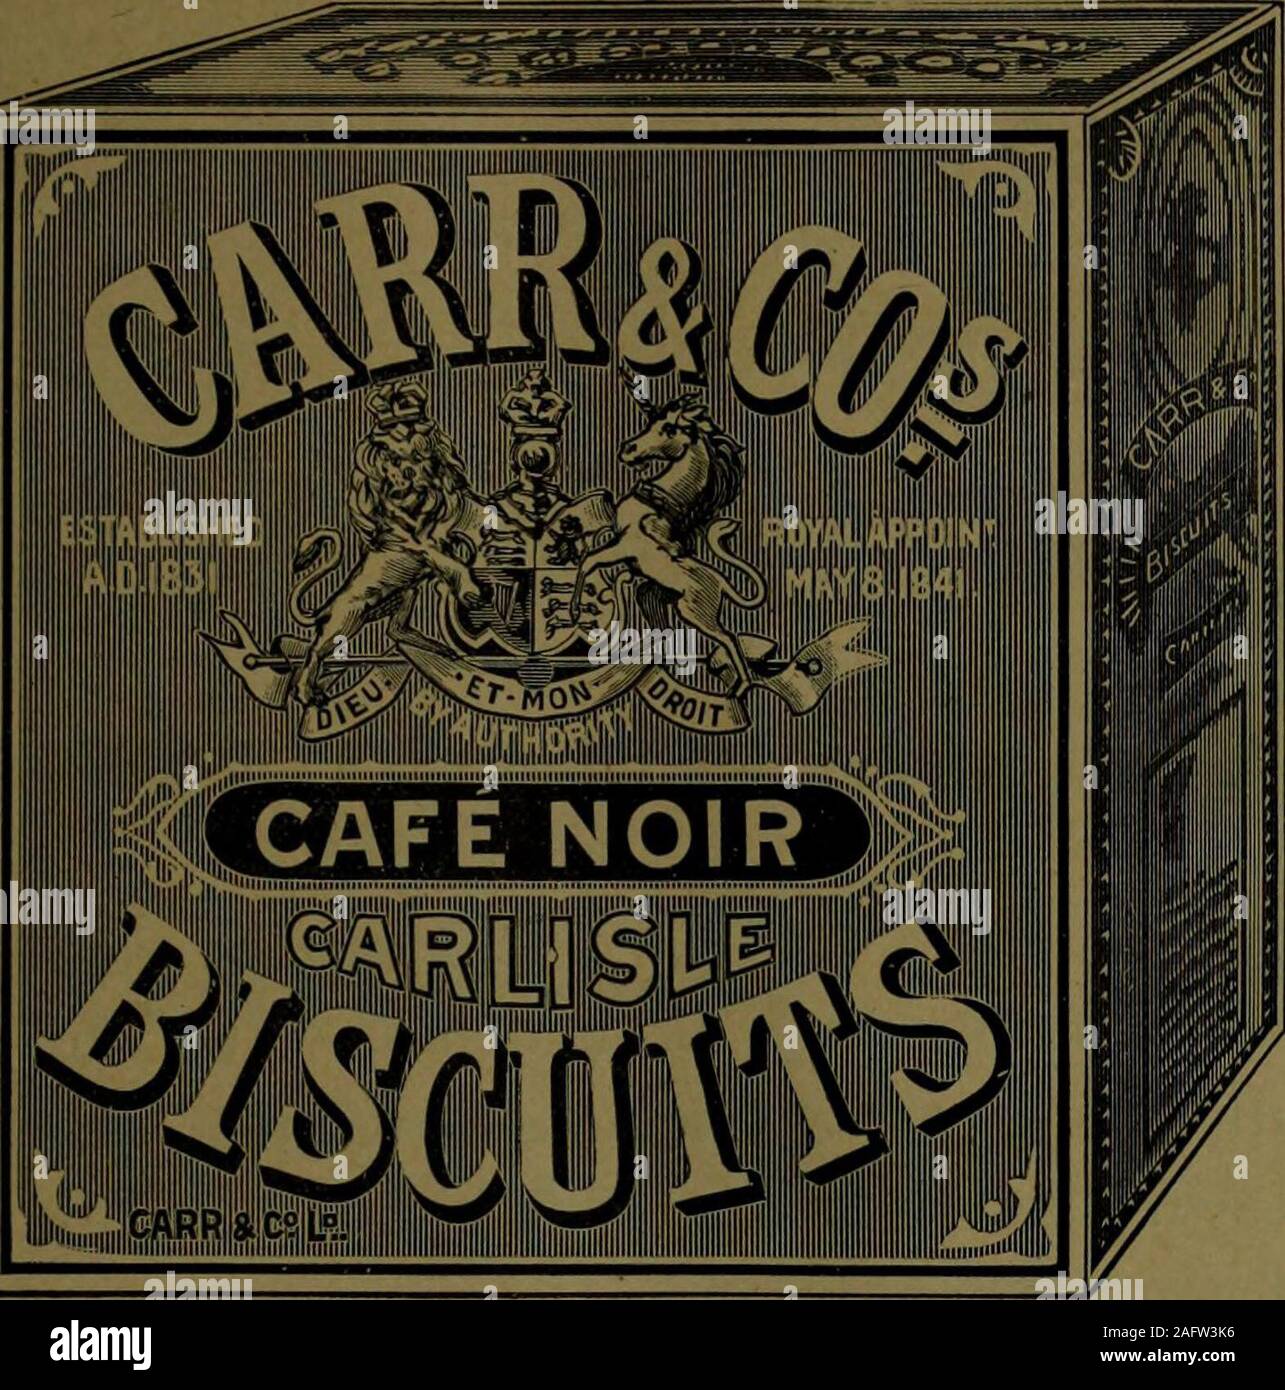 . Canadian grocer July-December 1896. OTHER SPECIALTIES. ir^^V f Qg^ ,- -Sj&gt;j f MEDALS AND DIILOMAS. NOUGAT , BUTTER SCOTCH 4 ^ (The Celebrated Sweet for Children). Jk 8^^ *&&lt;*&&lt;{/ urfuy&JrWlLs ^M PARIS SYDNEY MELBOURNE SPECIALTY CO., Toronto, im. 3*a* *M ROSE 4 LAFLAMME, Montreal. WORKS i LONDON. W.C. THE CANADIAN GROCER. Theres nouse Denyingthe Fact that the rapid increase inthe sale of Carr & Co.sBiscuits during the past year is asure proof of their merit.Carr & Co. were the firstfirm to manufacture fancybiscuits, and their producthas always stood first inquality. The Cafe Noiris a Stock Photo